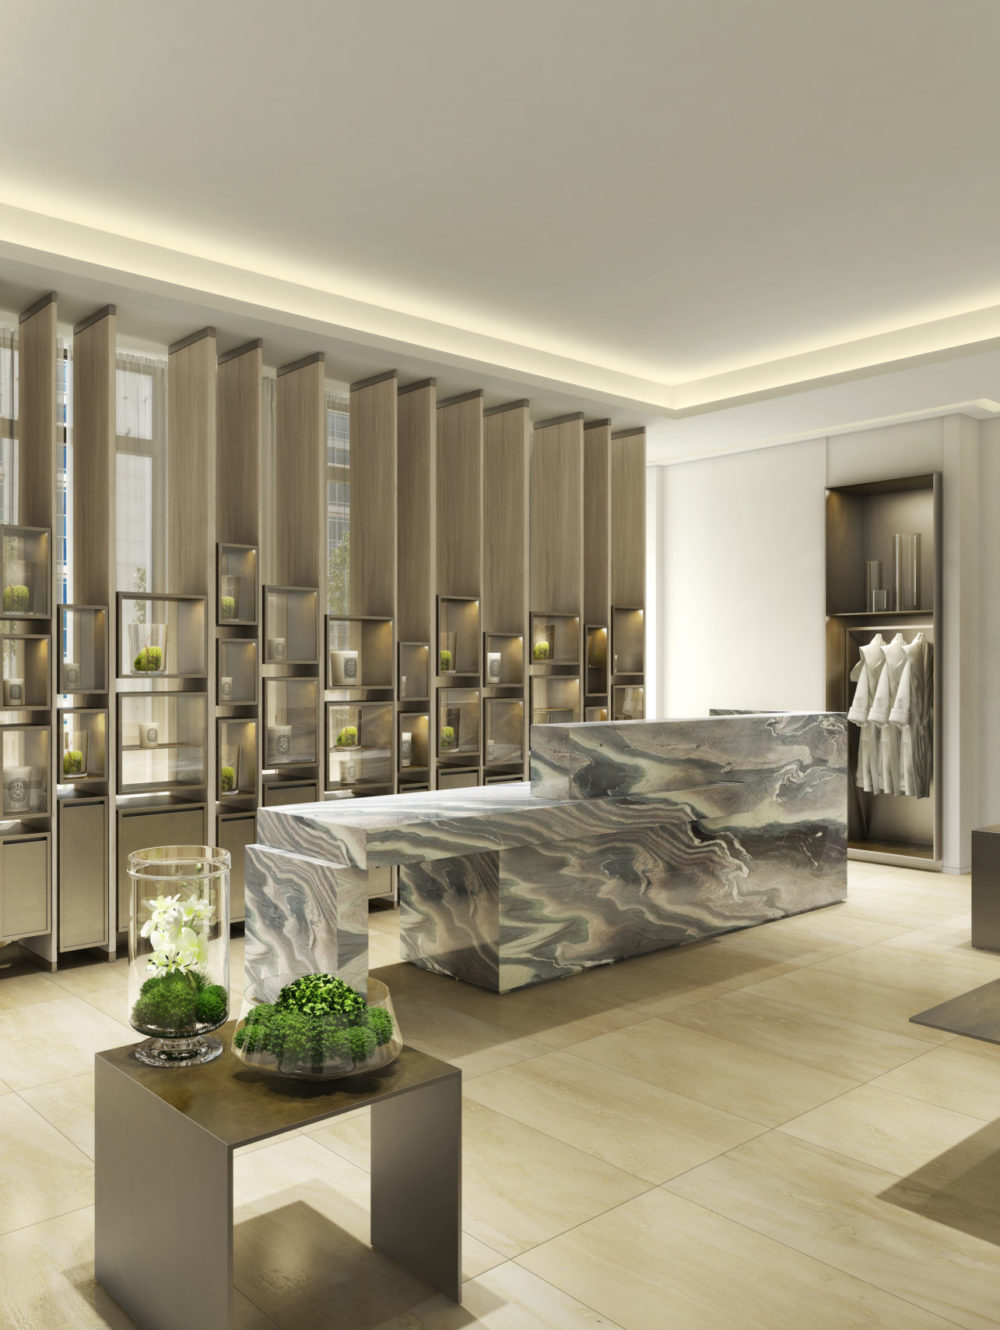 Interior view of 30 Park Place residence spa located in New York City. Has a massage table and light colored walls and floor.